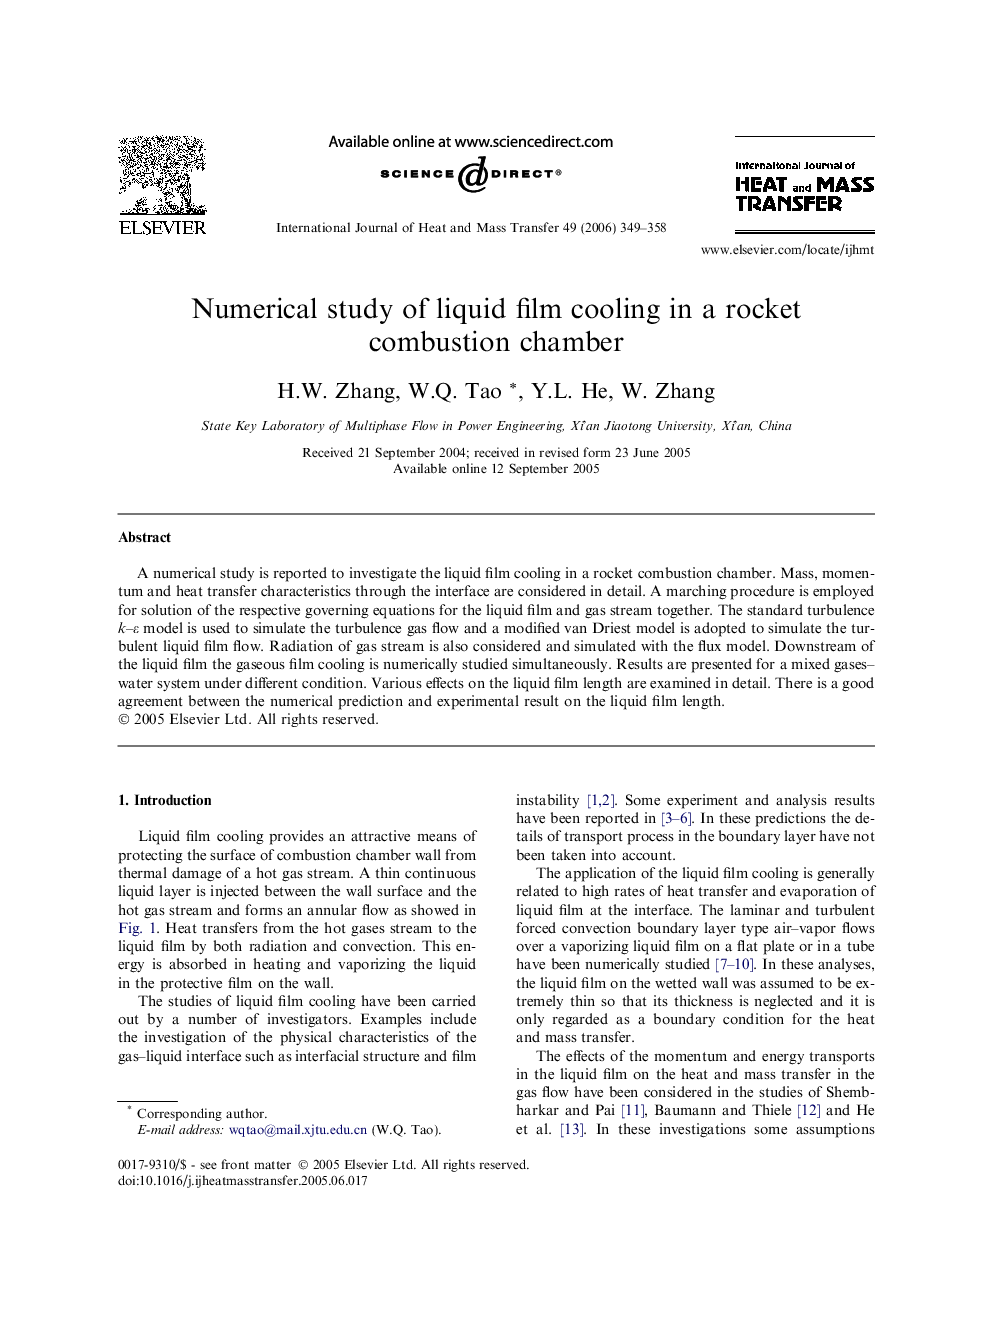 Numerical study of liquid film cooling in a rocket combustion chamber